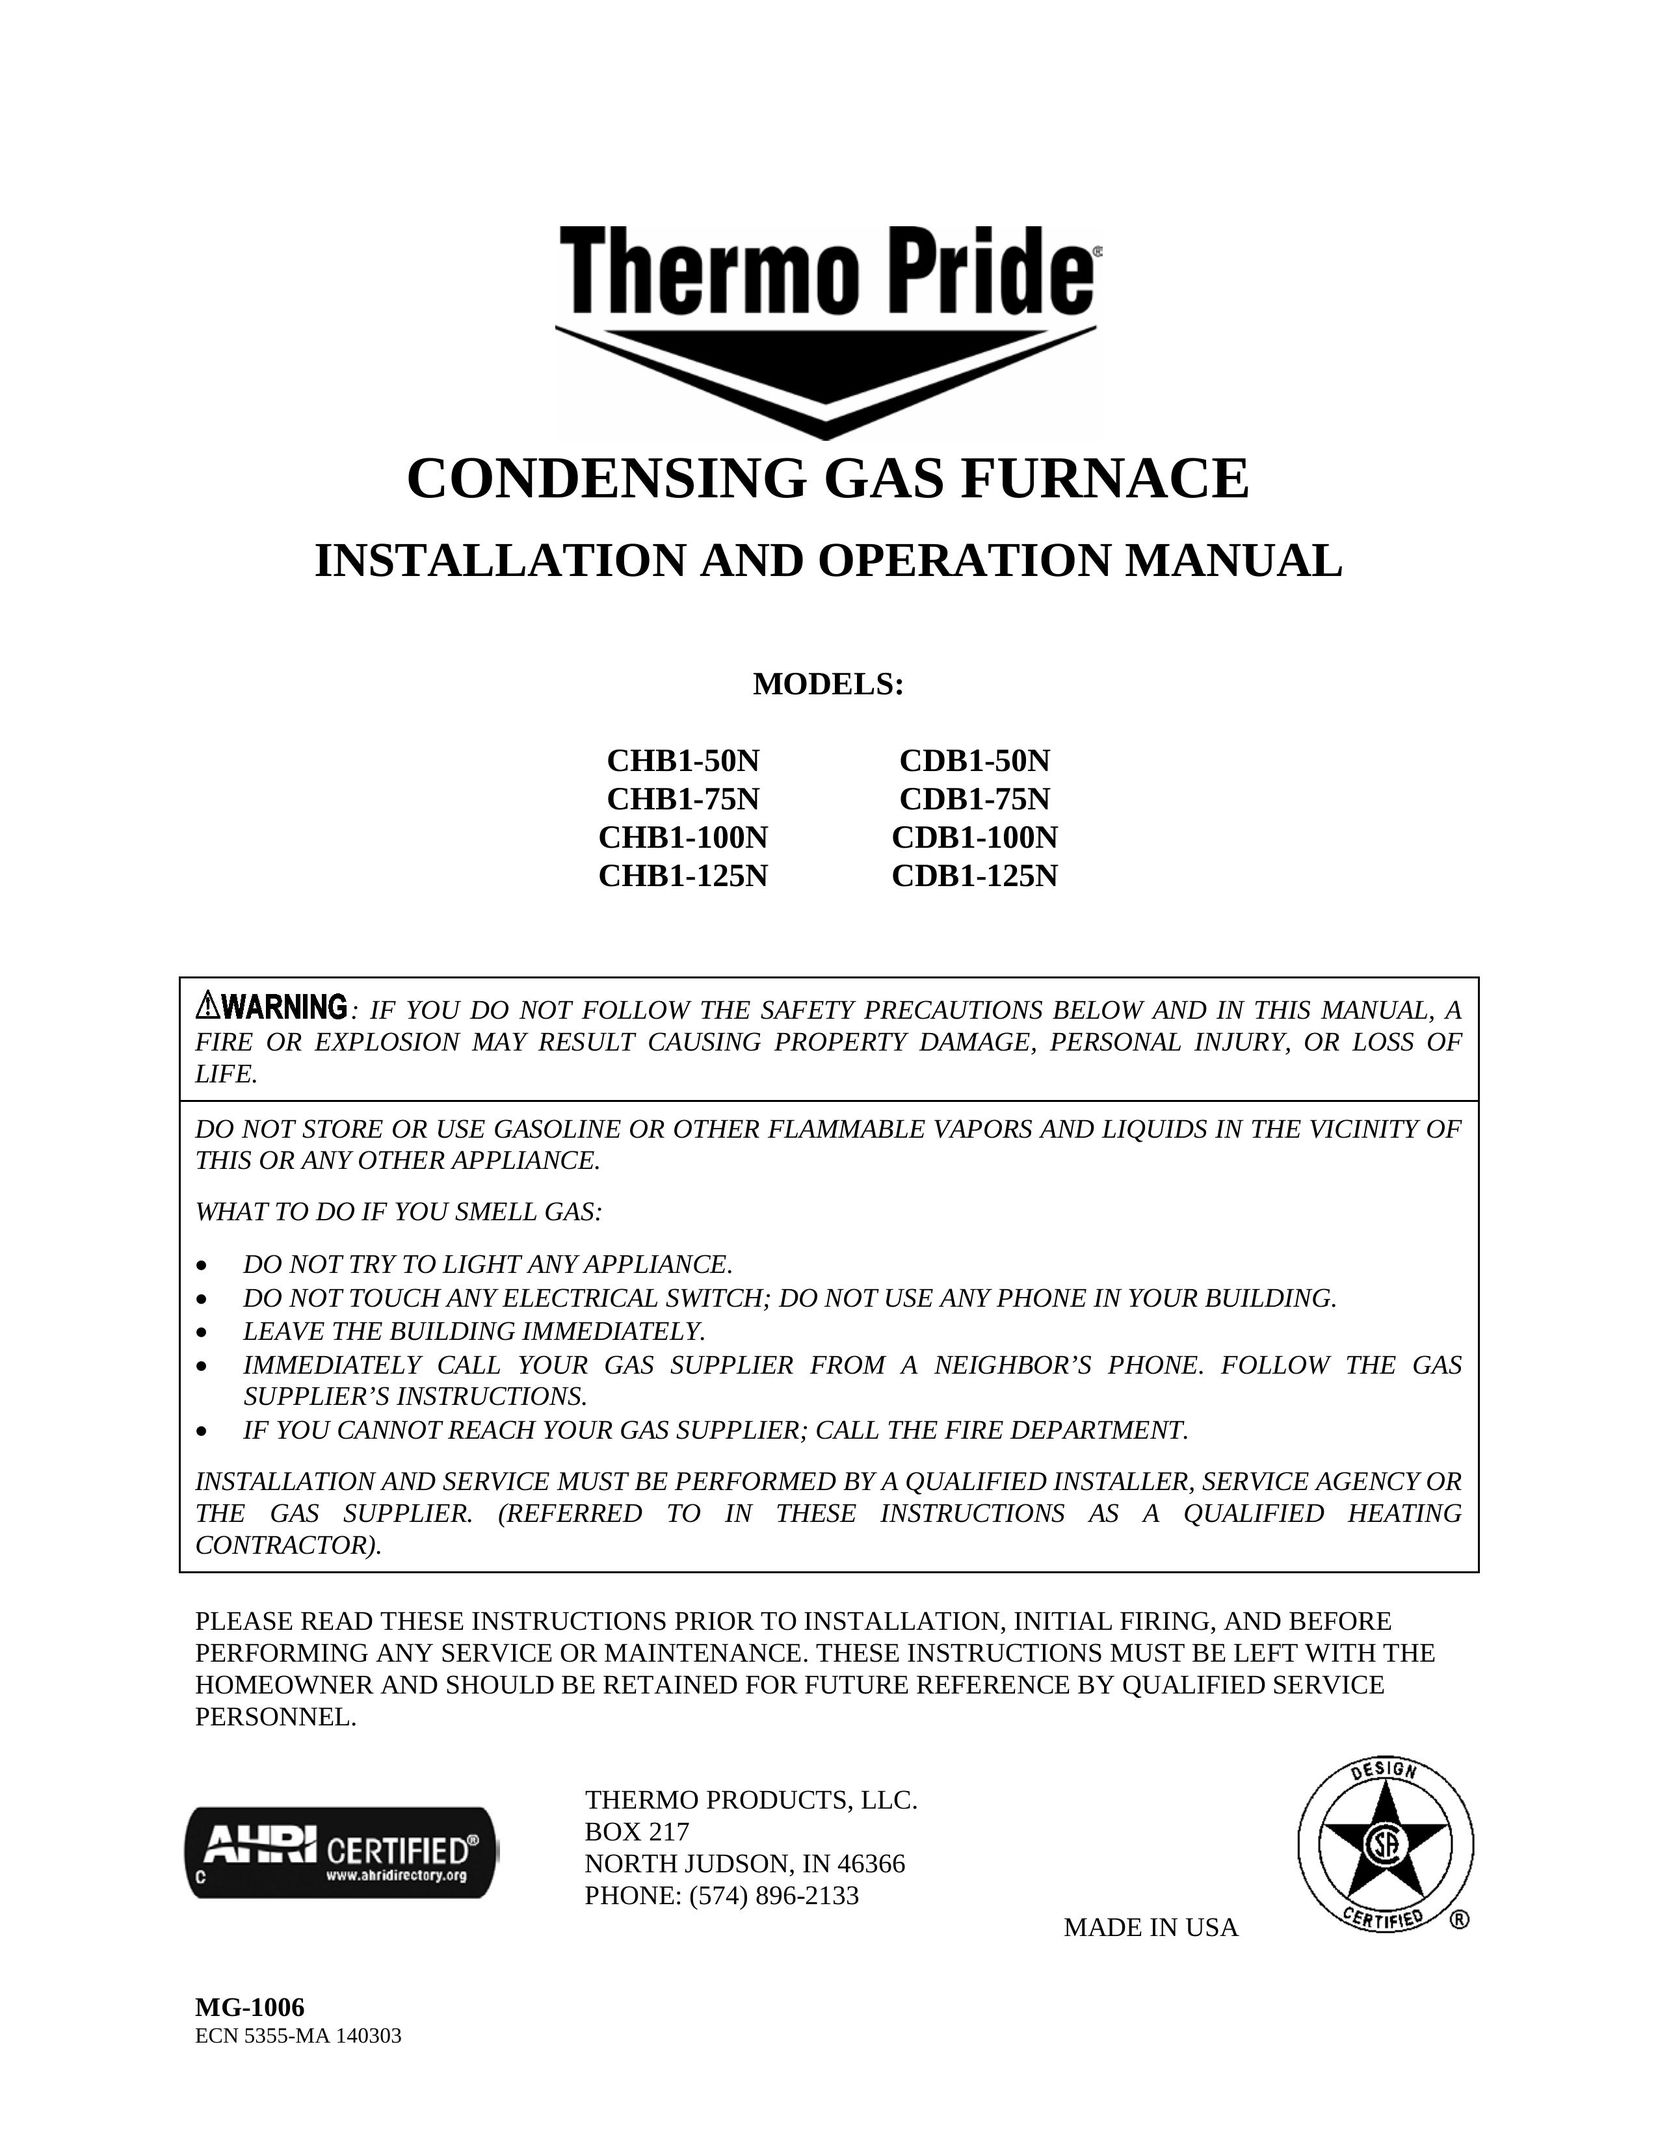 Thermo Products CHB1-100N Furnace User Manual